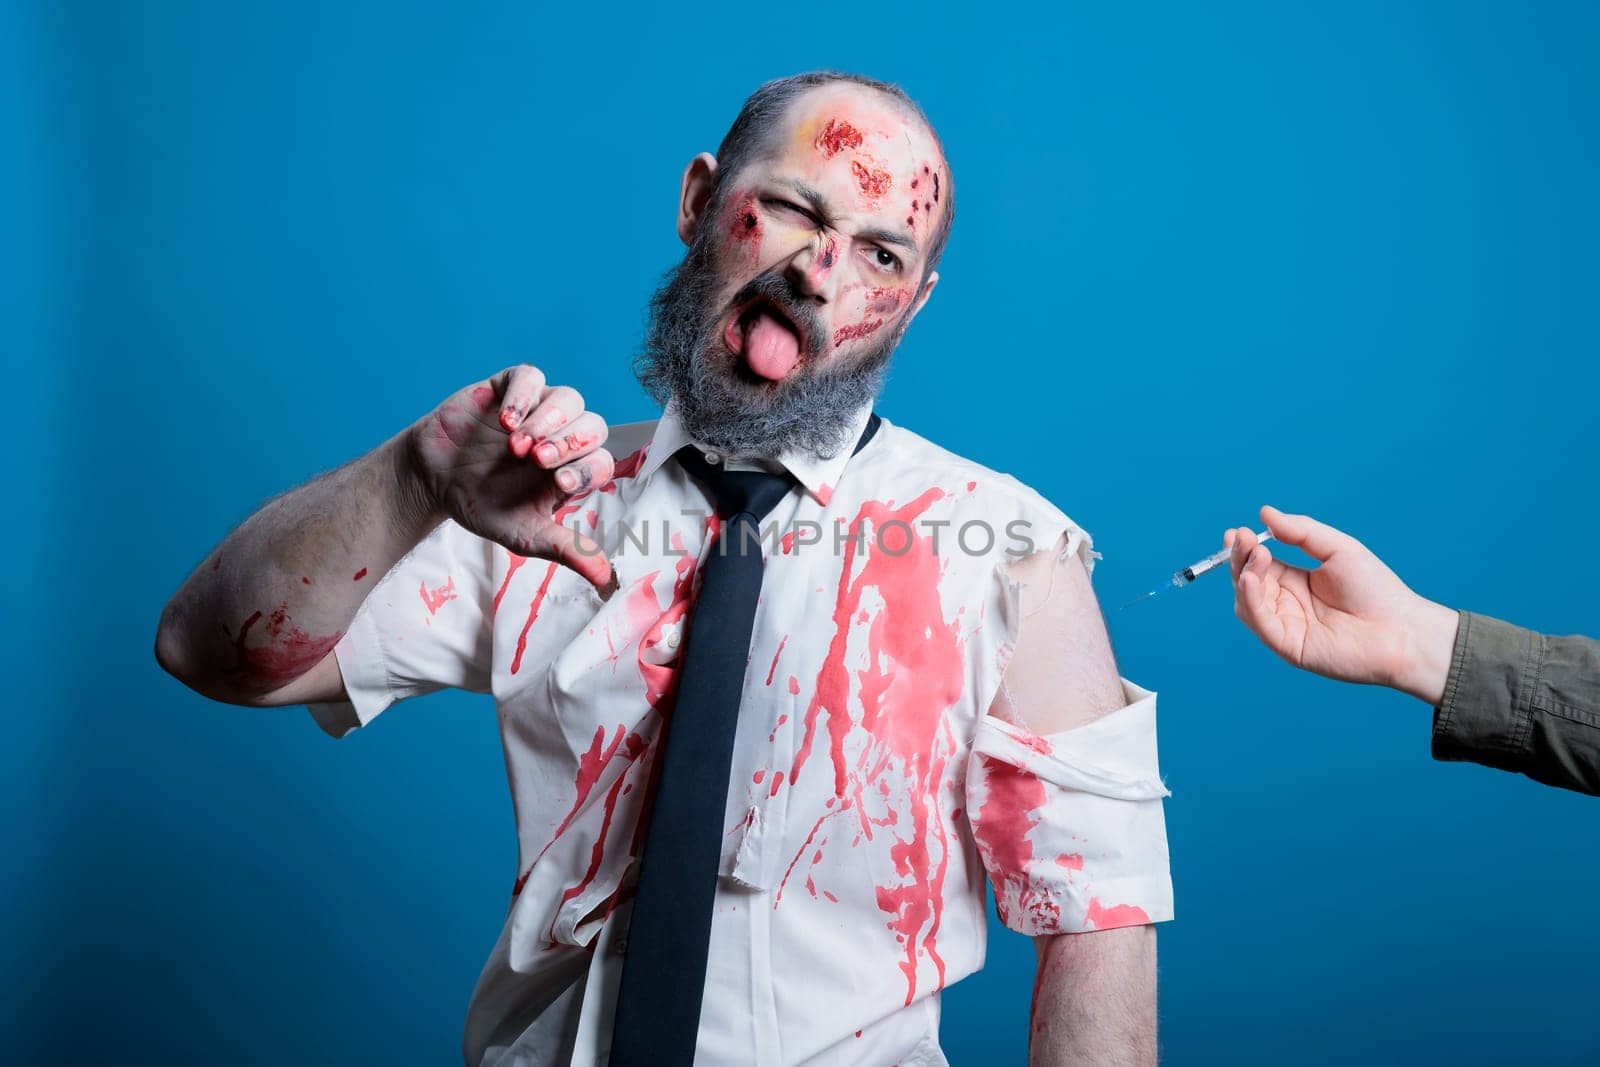 Man forced to take coronavirus vaccine shot showing thumbs down, conspiracy theory concept. Antivaxxer person receiving injection against will, showing disapproving hand gesture, studio background